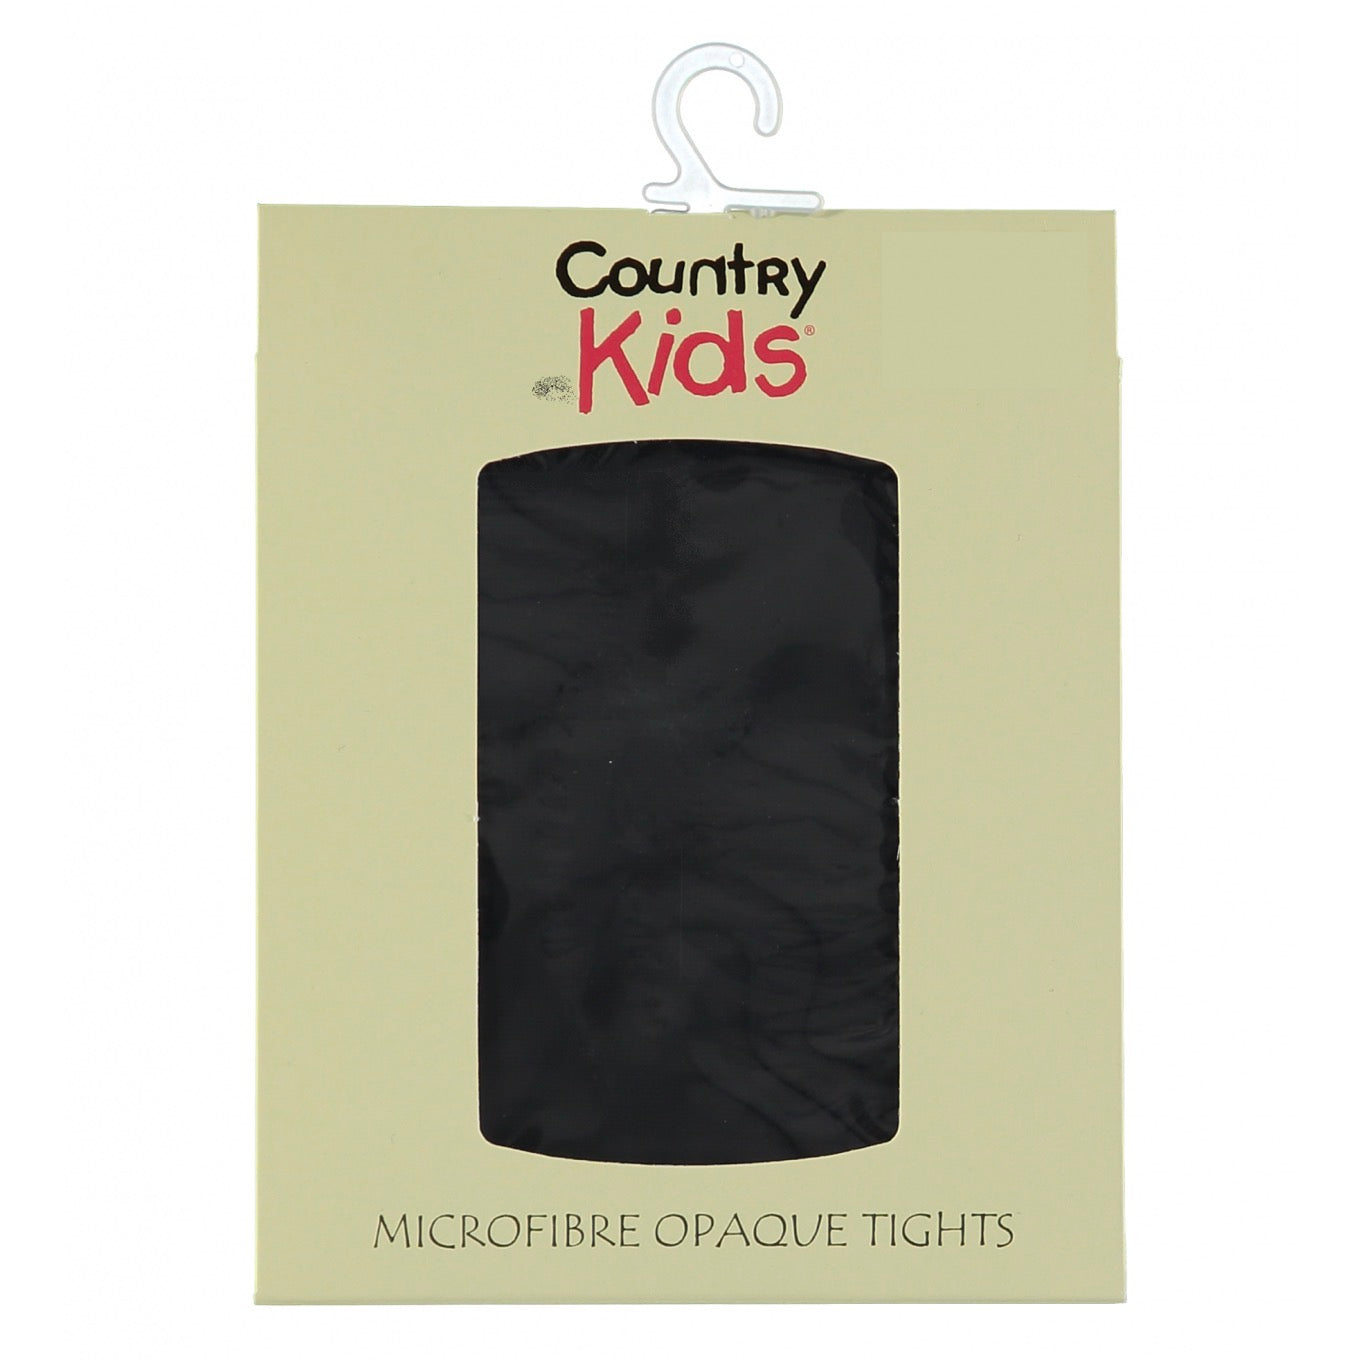 Country Kids Opaque Tights Black Clothing 3-5YRS / Black,6-8YRS / Black,9-11YRS / Black,12-15YRS / Black